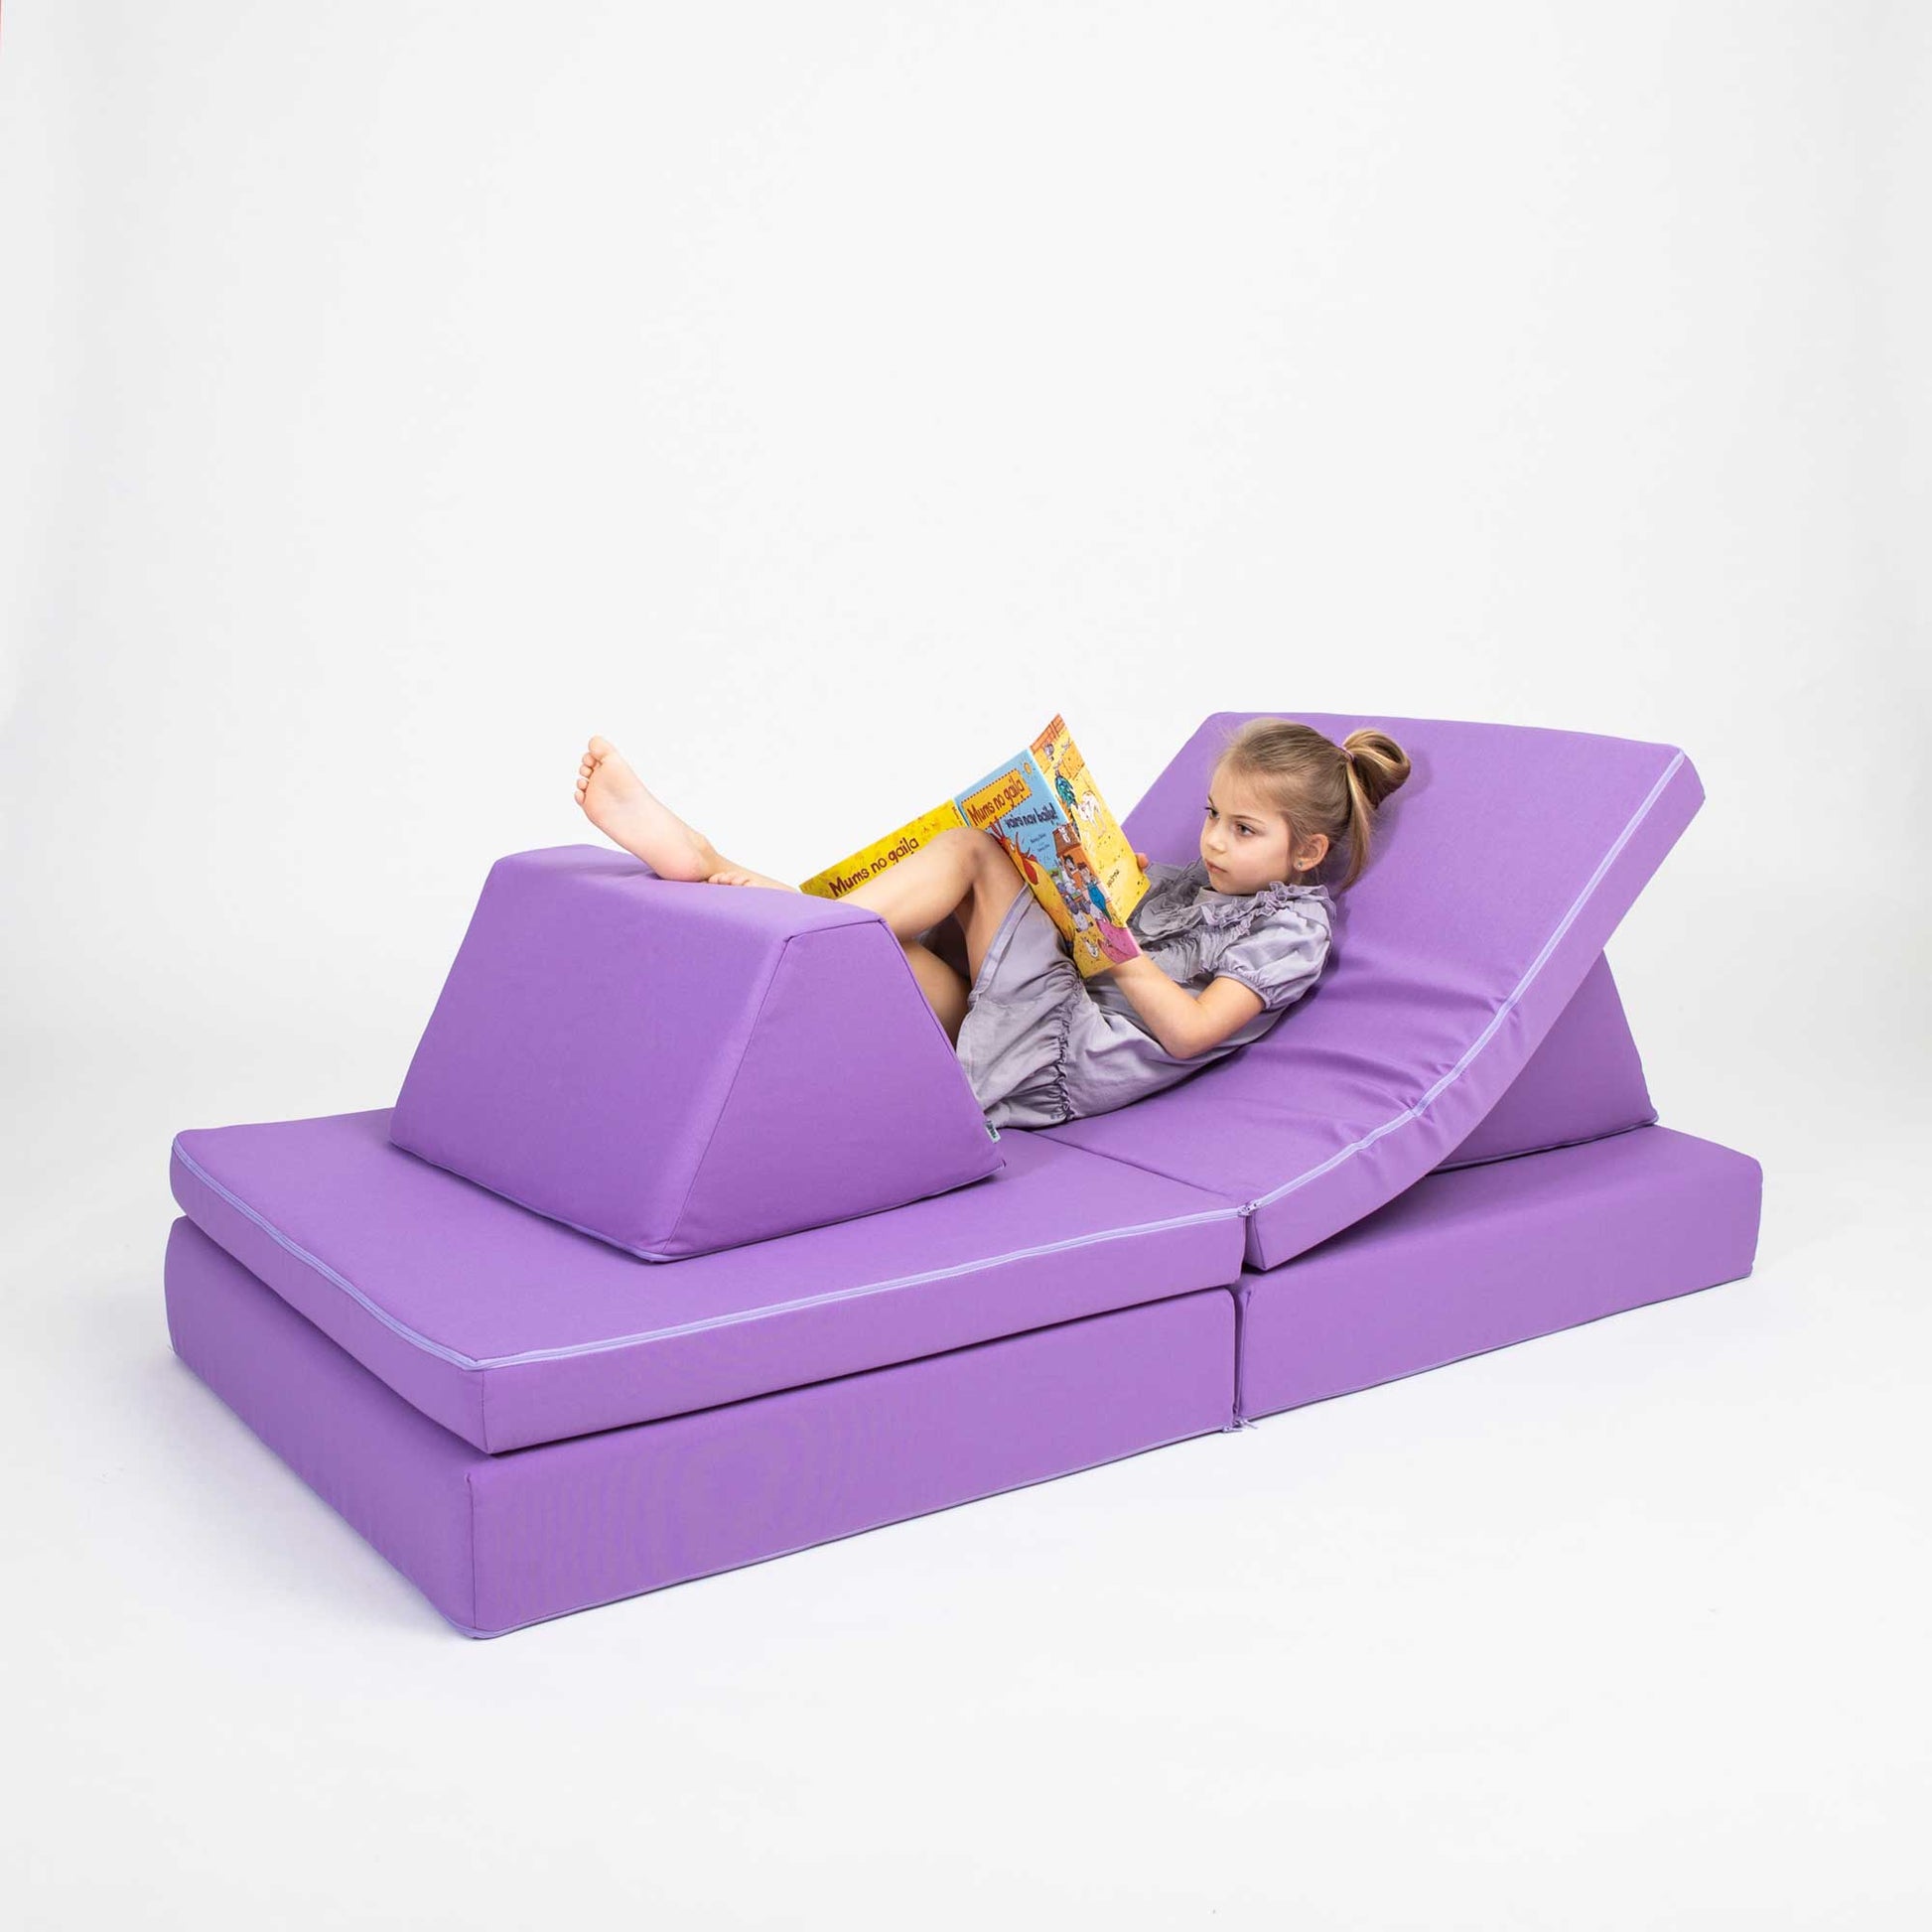 A girl laying down and reading on a purple Monboxy activity couch